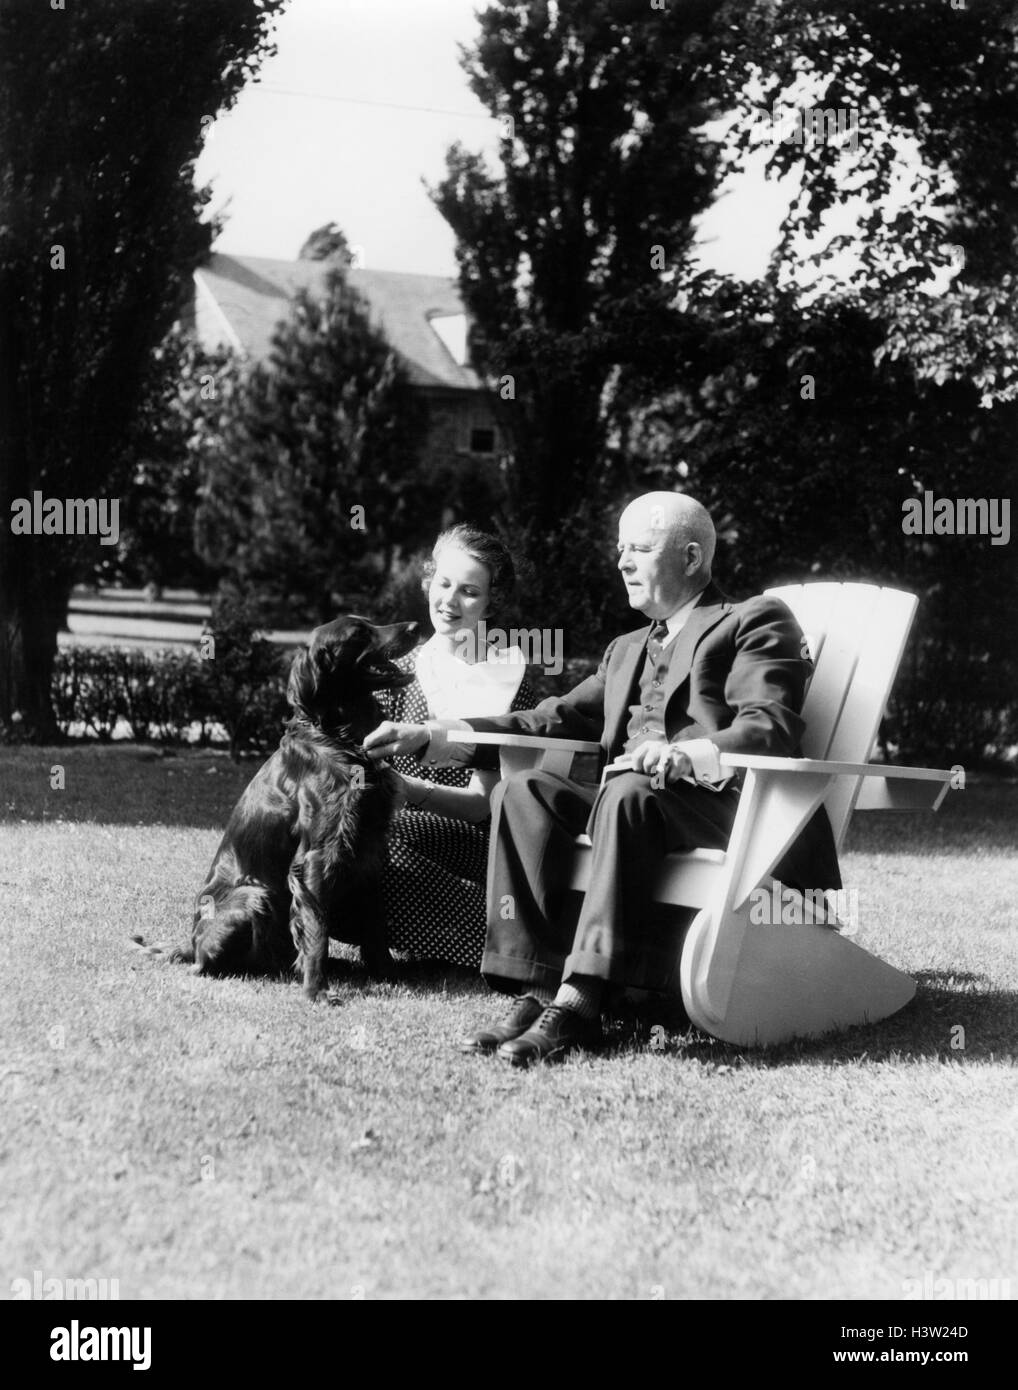 1930s ELDERLY MAN SITTING ON ADIRONDACK CHAIR IN YARD YOUNG WOMAN KNEELING NEXT TO HIM WITH IRISH SETTER DOG Stock Photo